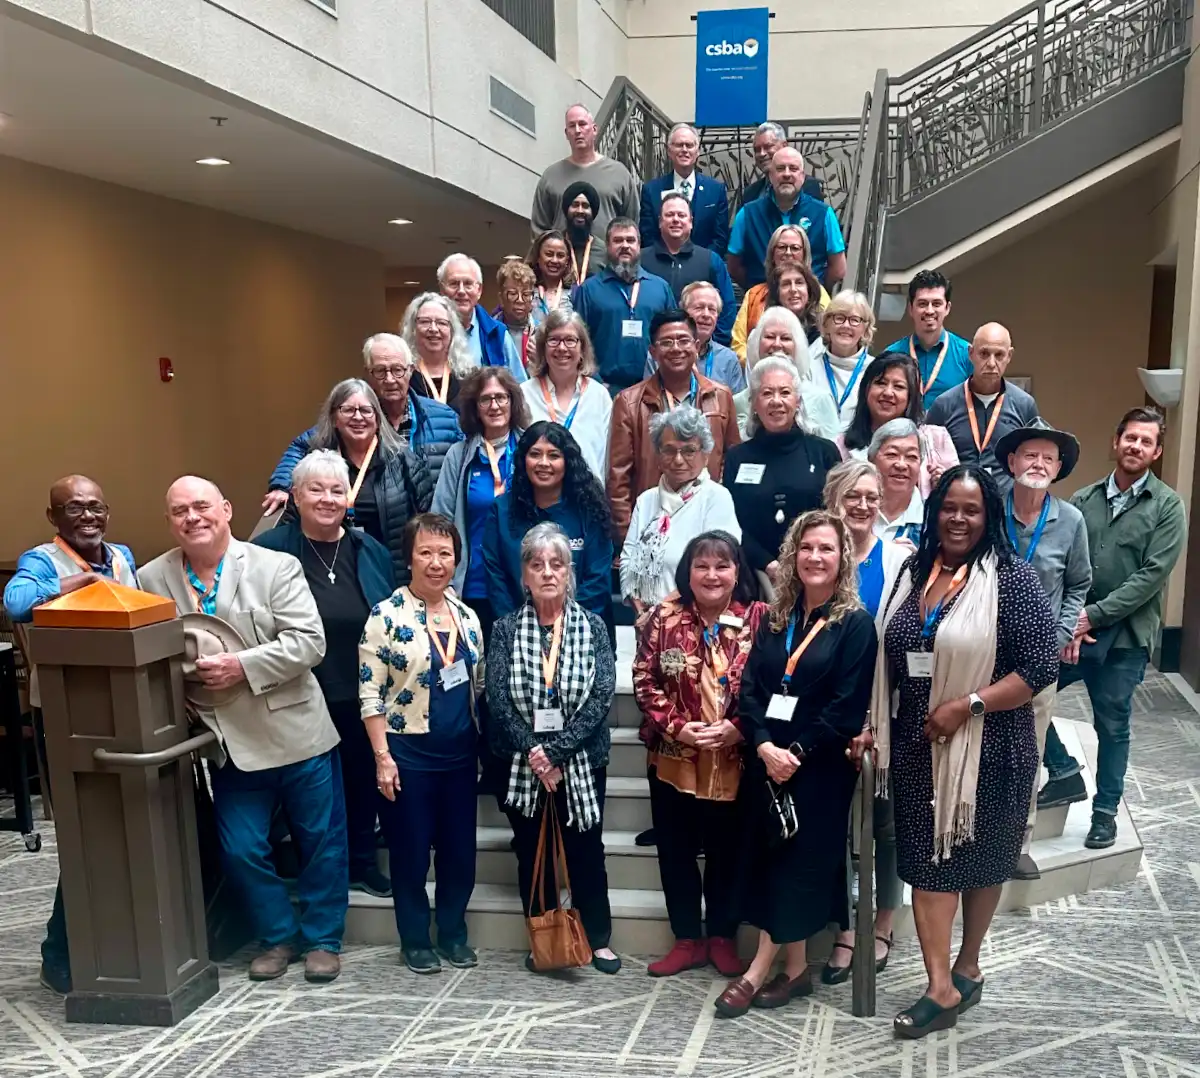 county board members posing together on a staircase at the CSBA County Board Workshop